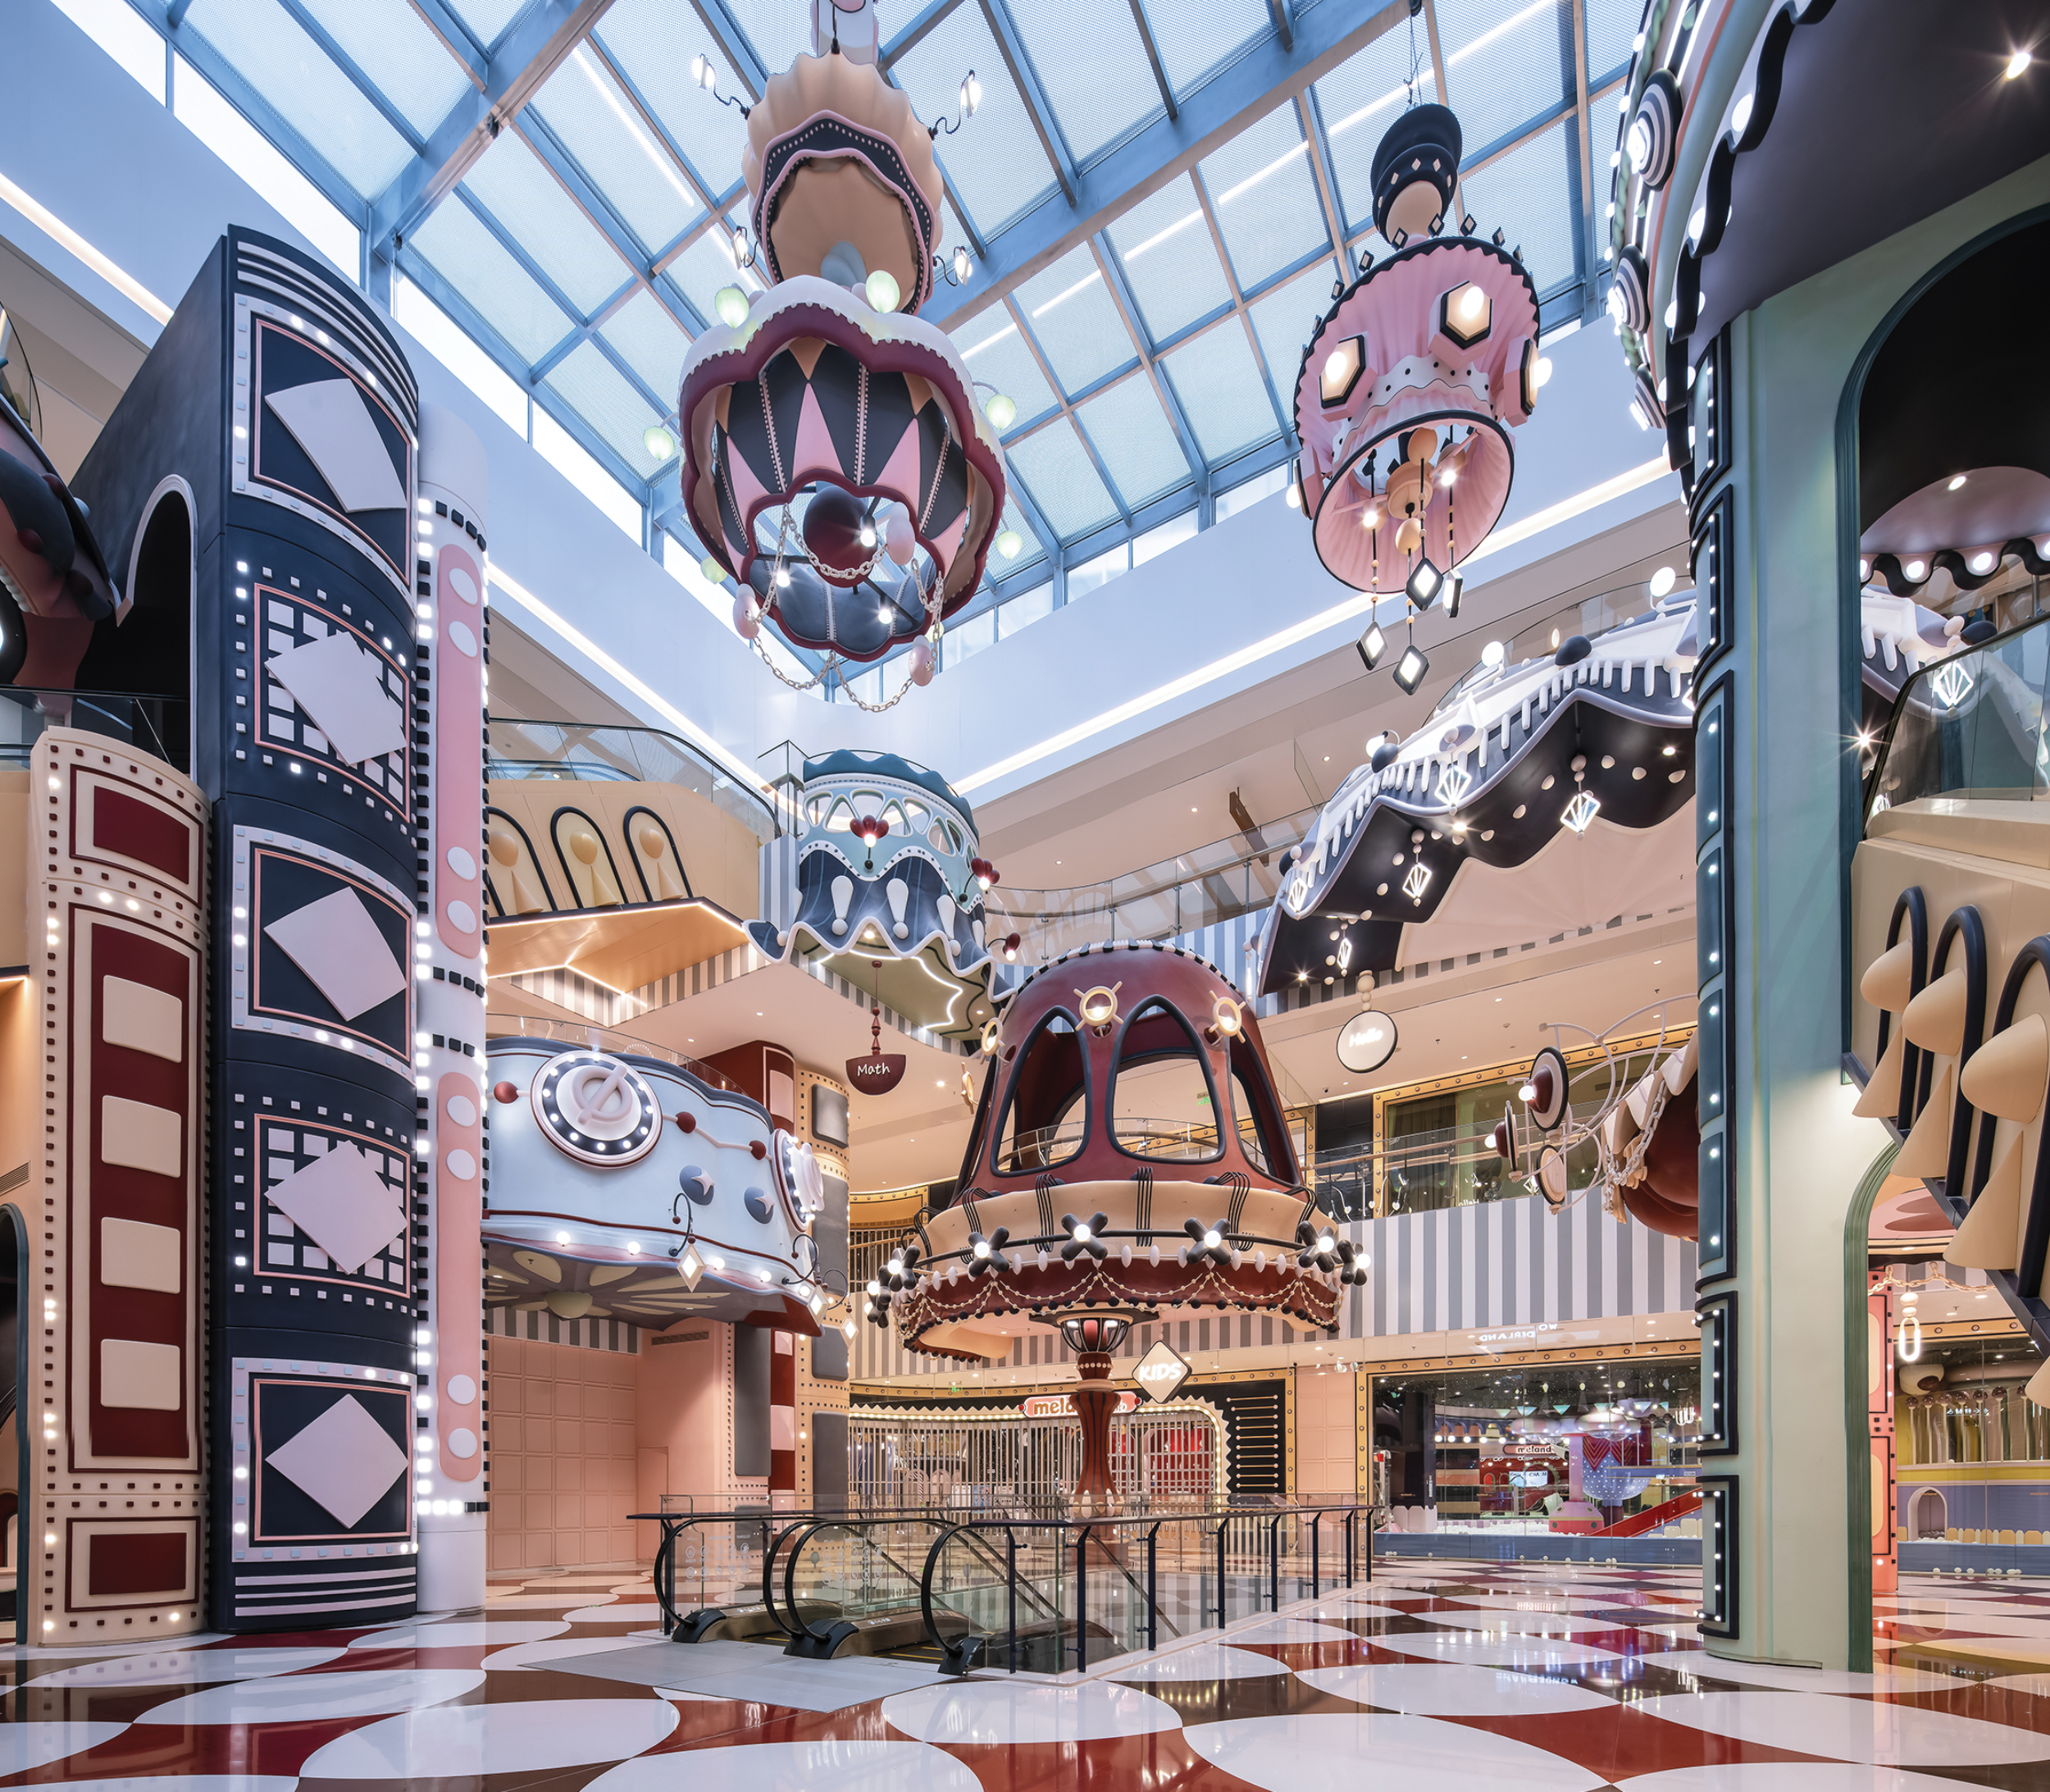 Shopping Mall Becomes a Whimsical Wonderland Thanks to Shanghai Firm